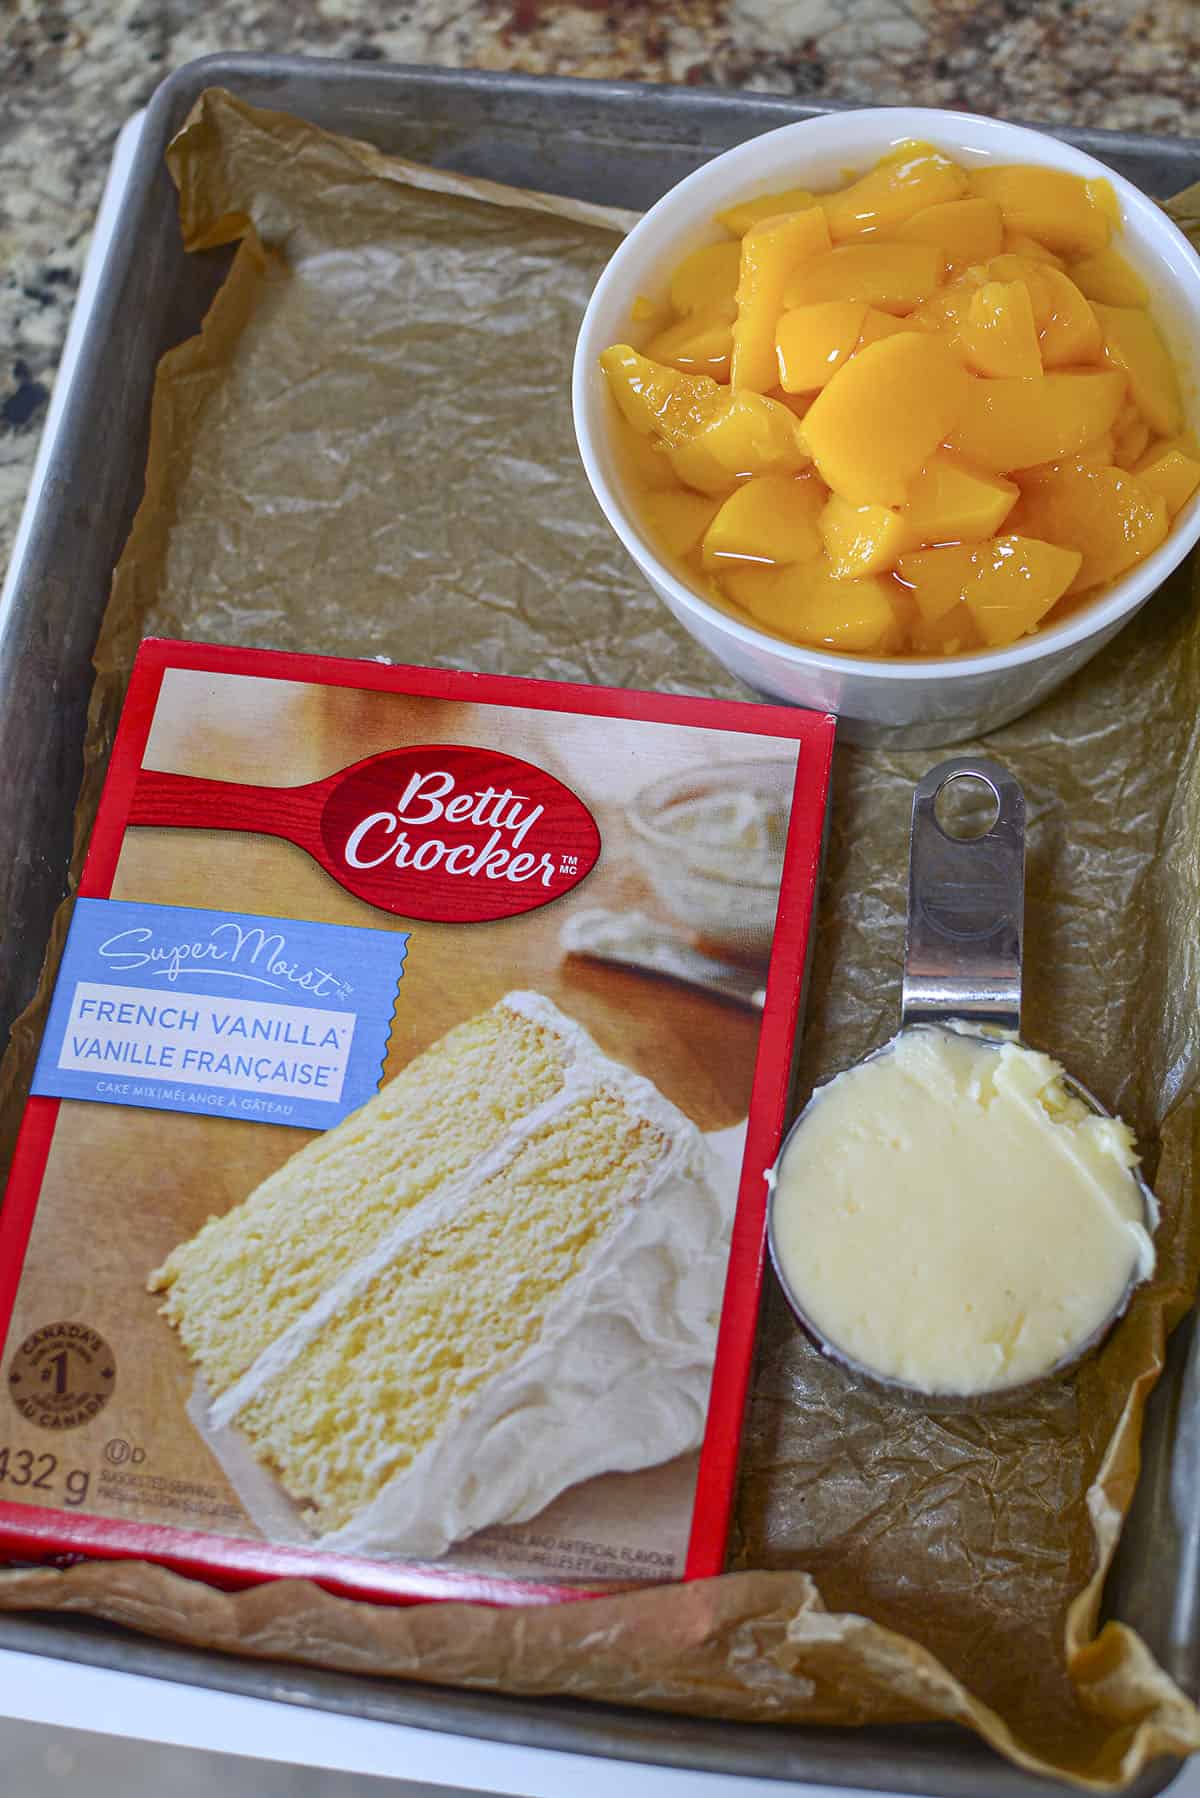 Ingredients for the cobbler. Peaches, butter and a french vanilla cake mix.